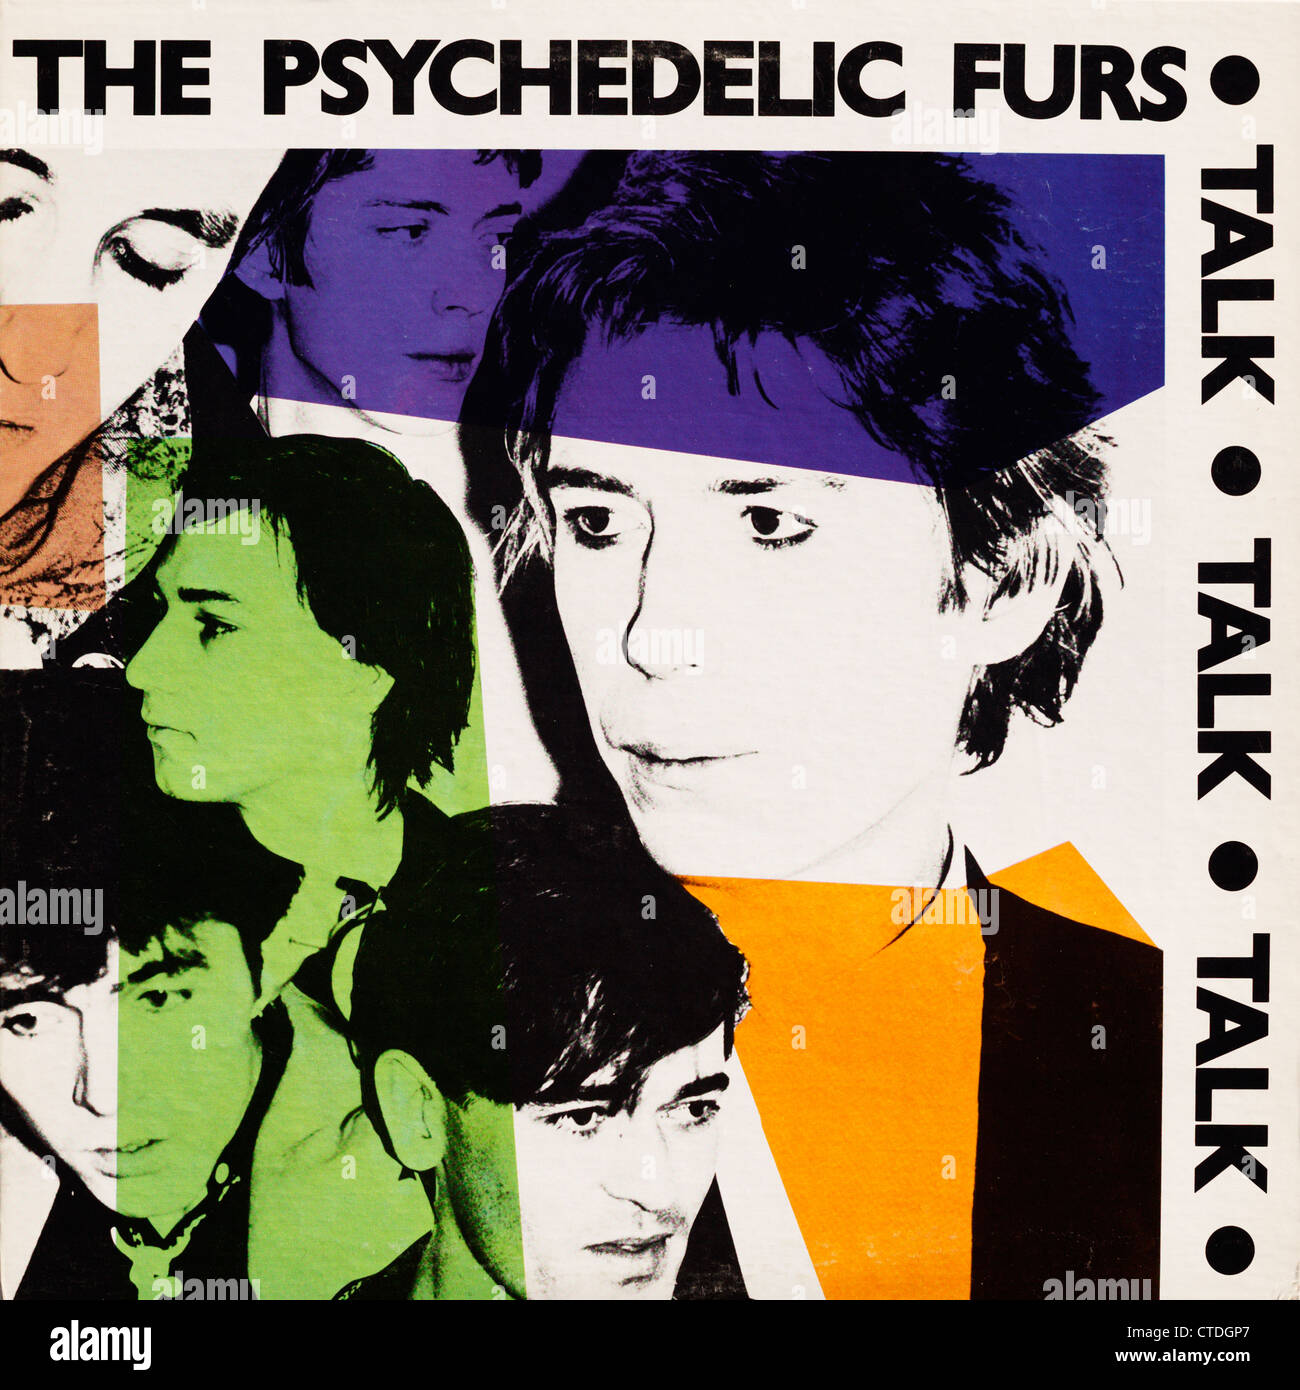 Vinyl LP record album cover from the Psychedelic Furs - Talk Talk Talk.  Editorial use only.  Commercial use prohibited. Stock Photo